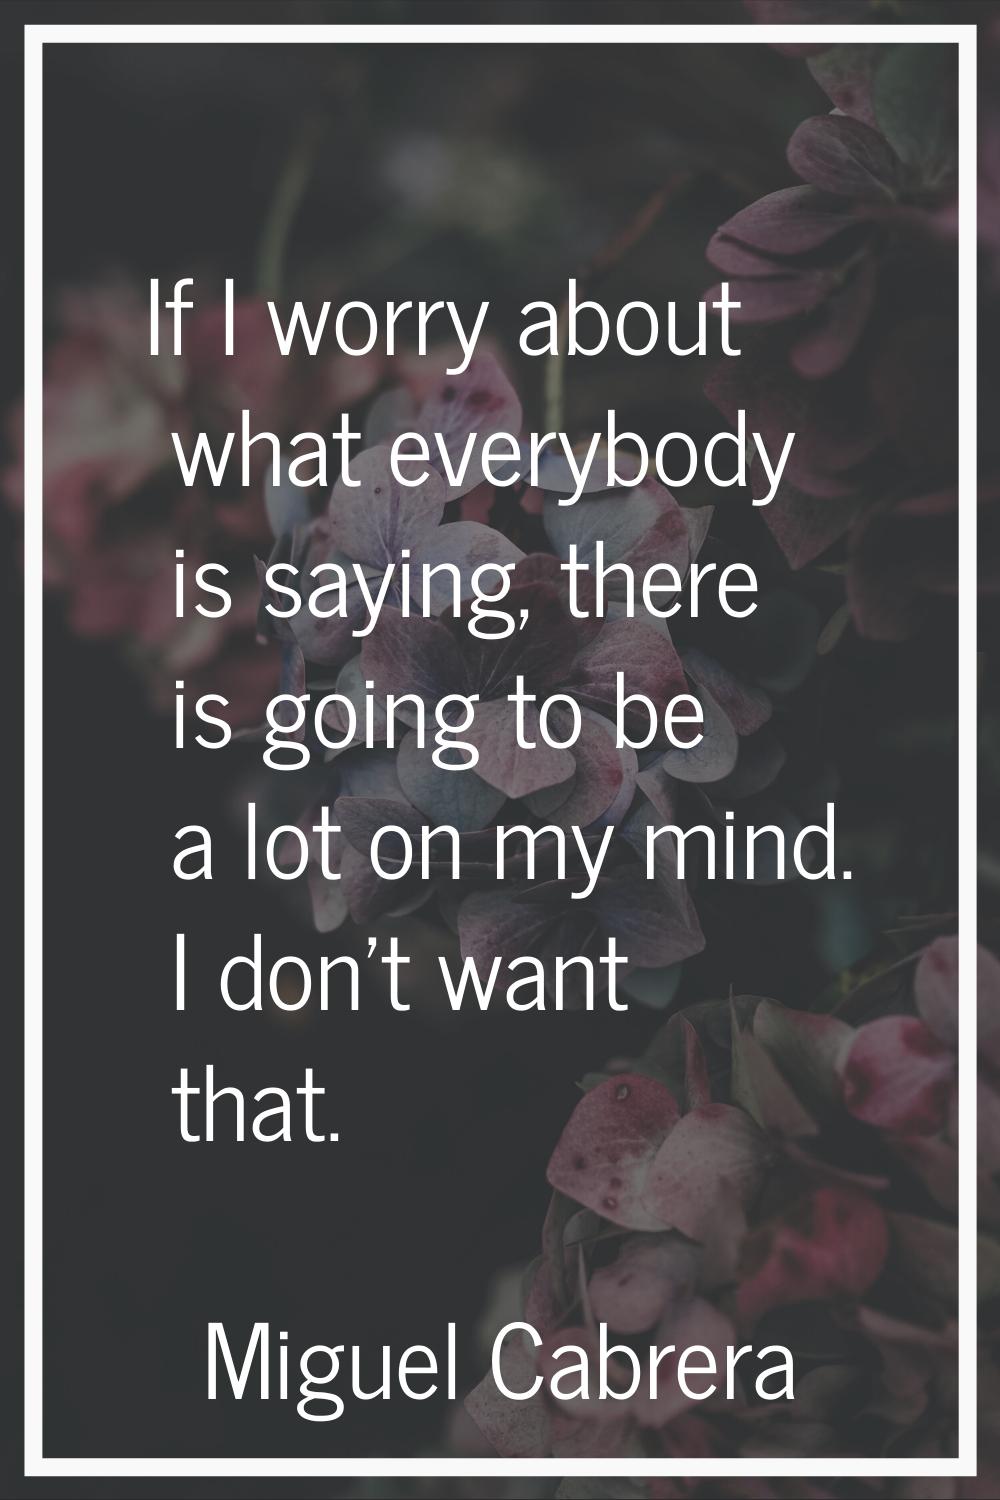 If I worry about what everybody is saying, there is going to be a lot on my mind. I don't want that